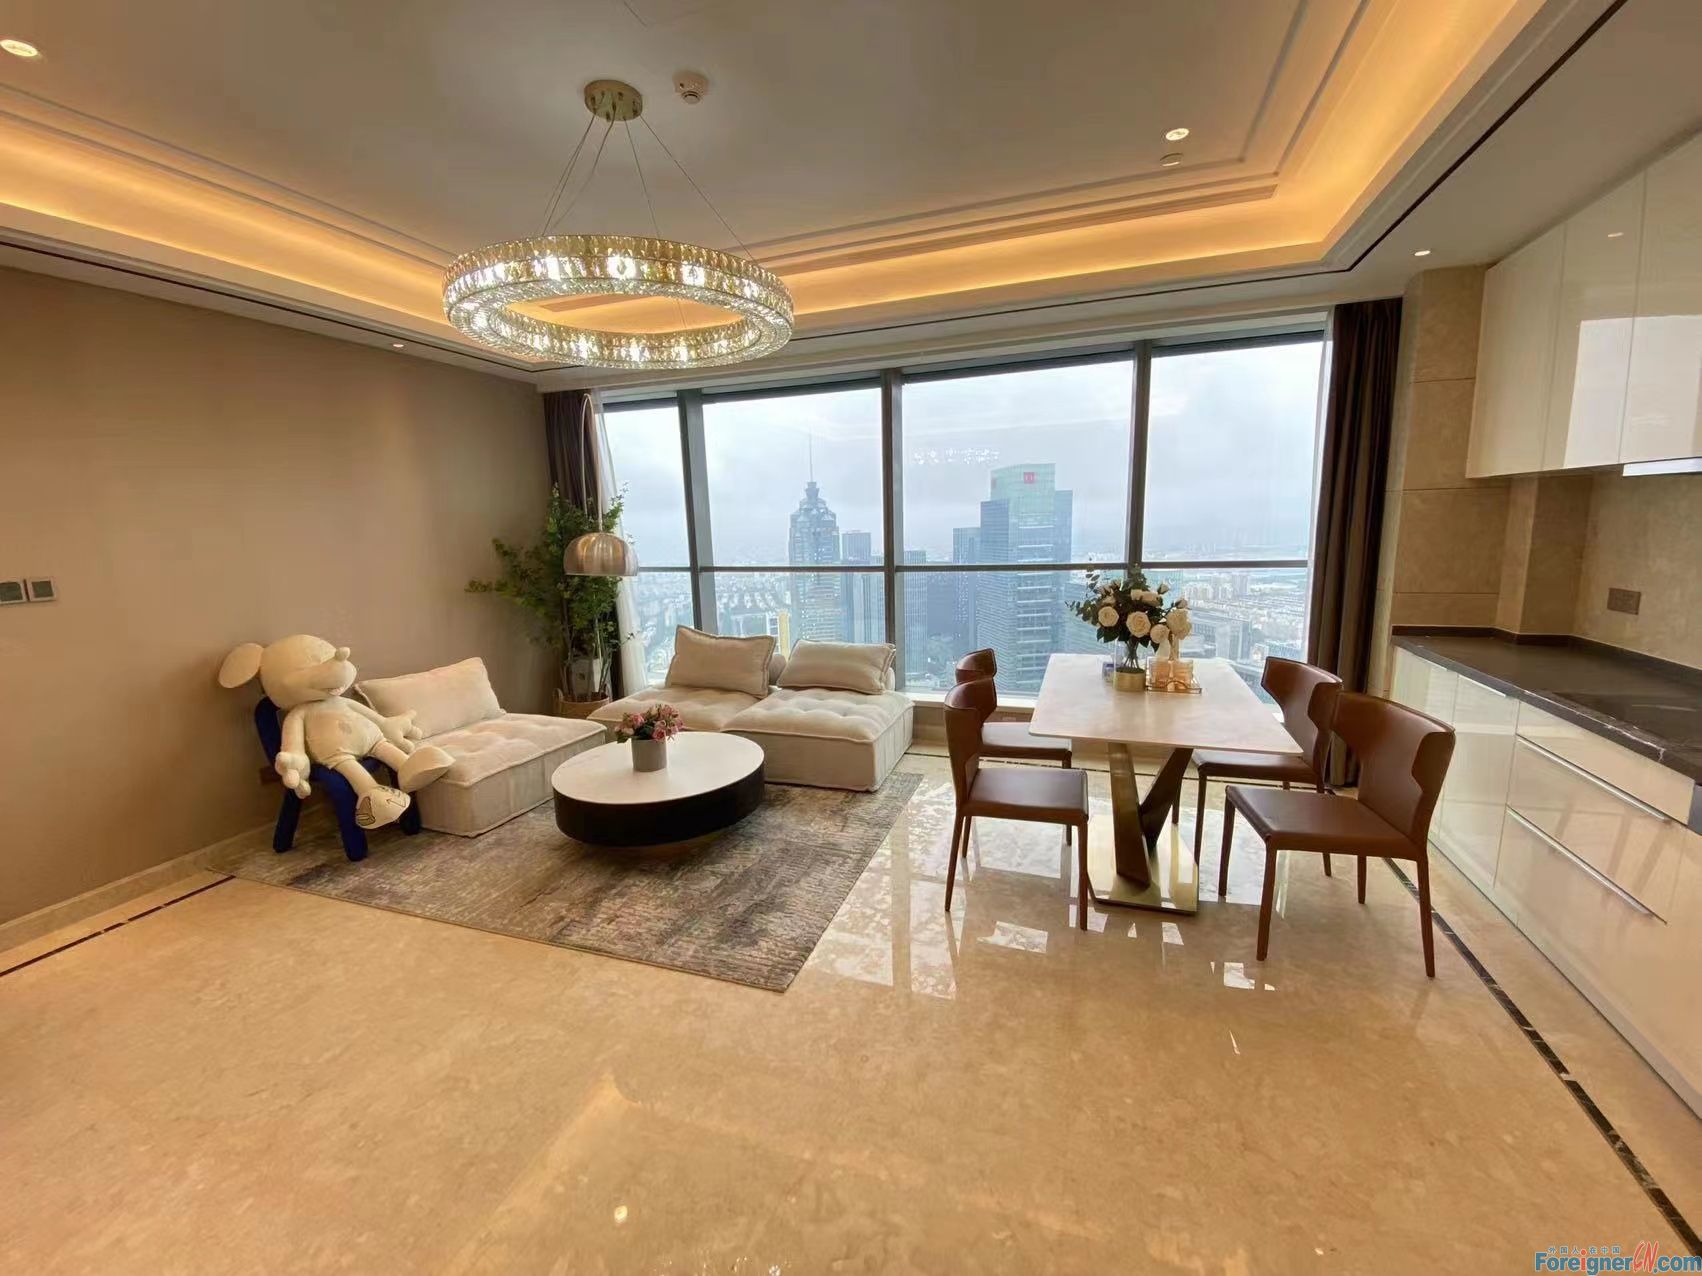 Spacious!! high floor/City-View Suzhou Center apartment in SIP rent/2 bedrooms,2 bathrooms/Jinji Lake,SIP /Beautiful lake view /fully furnished,Central AC/bright rooms with French windows